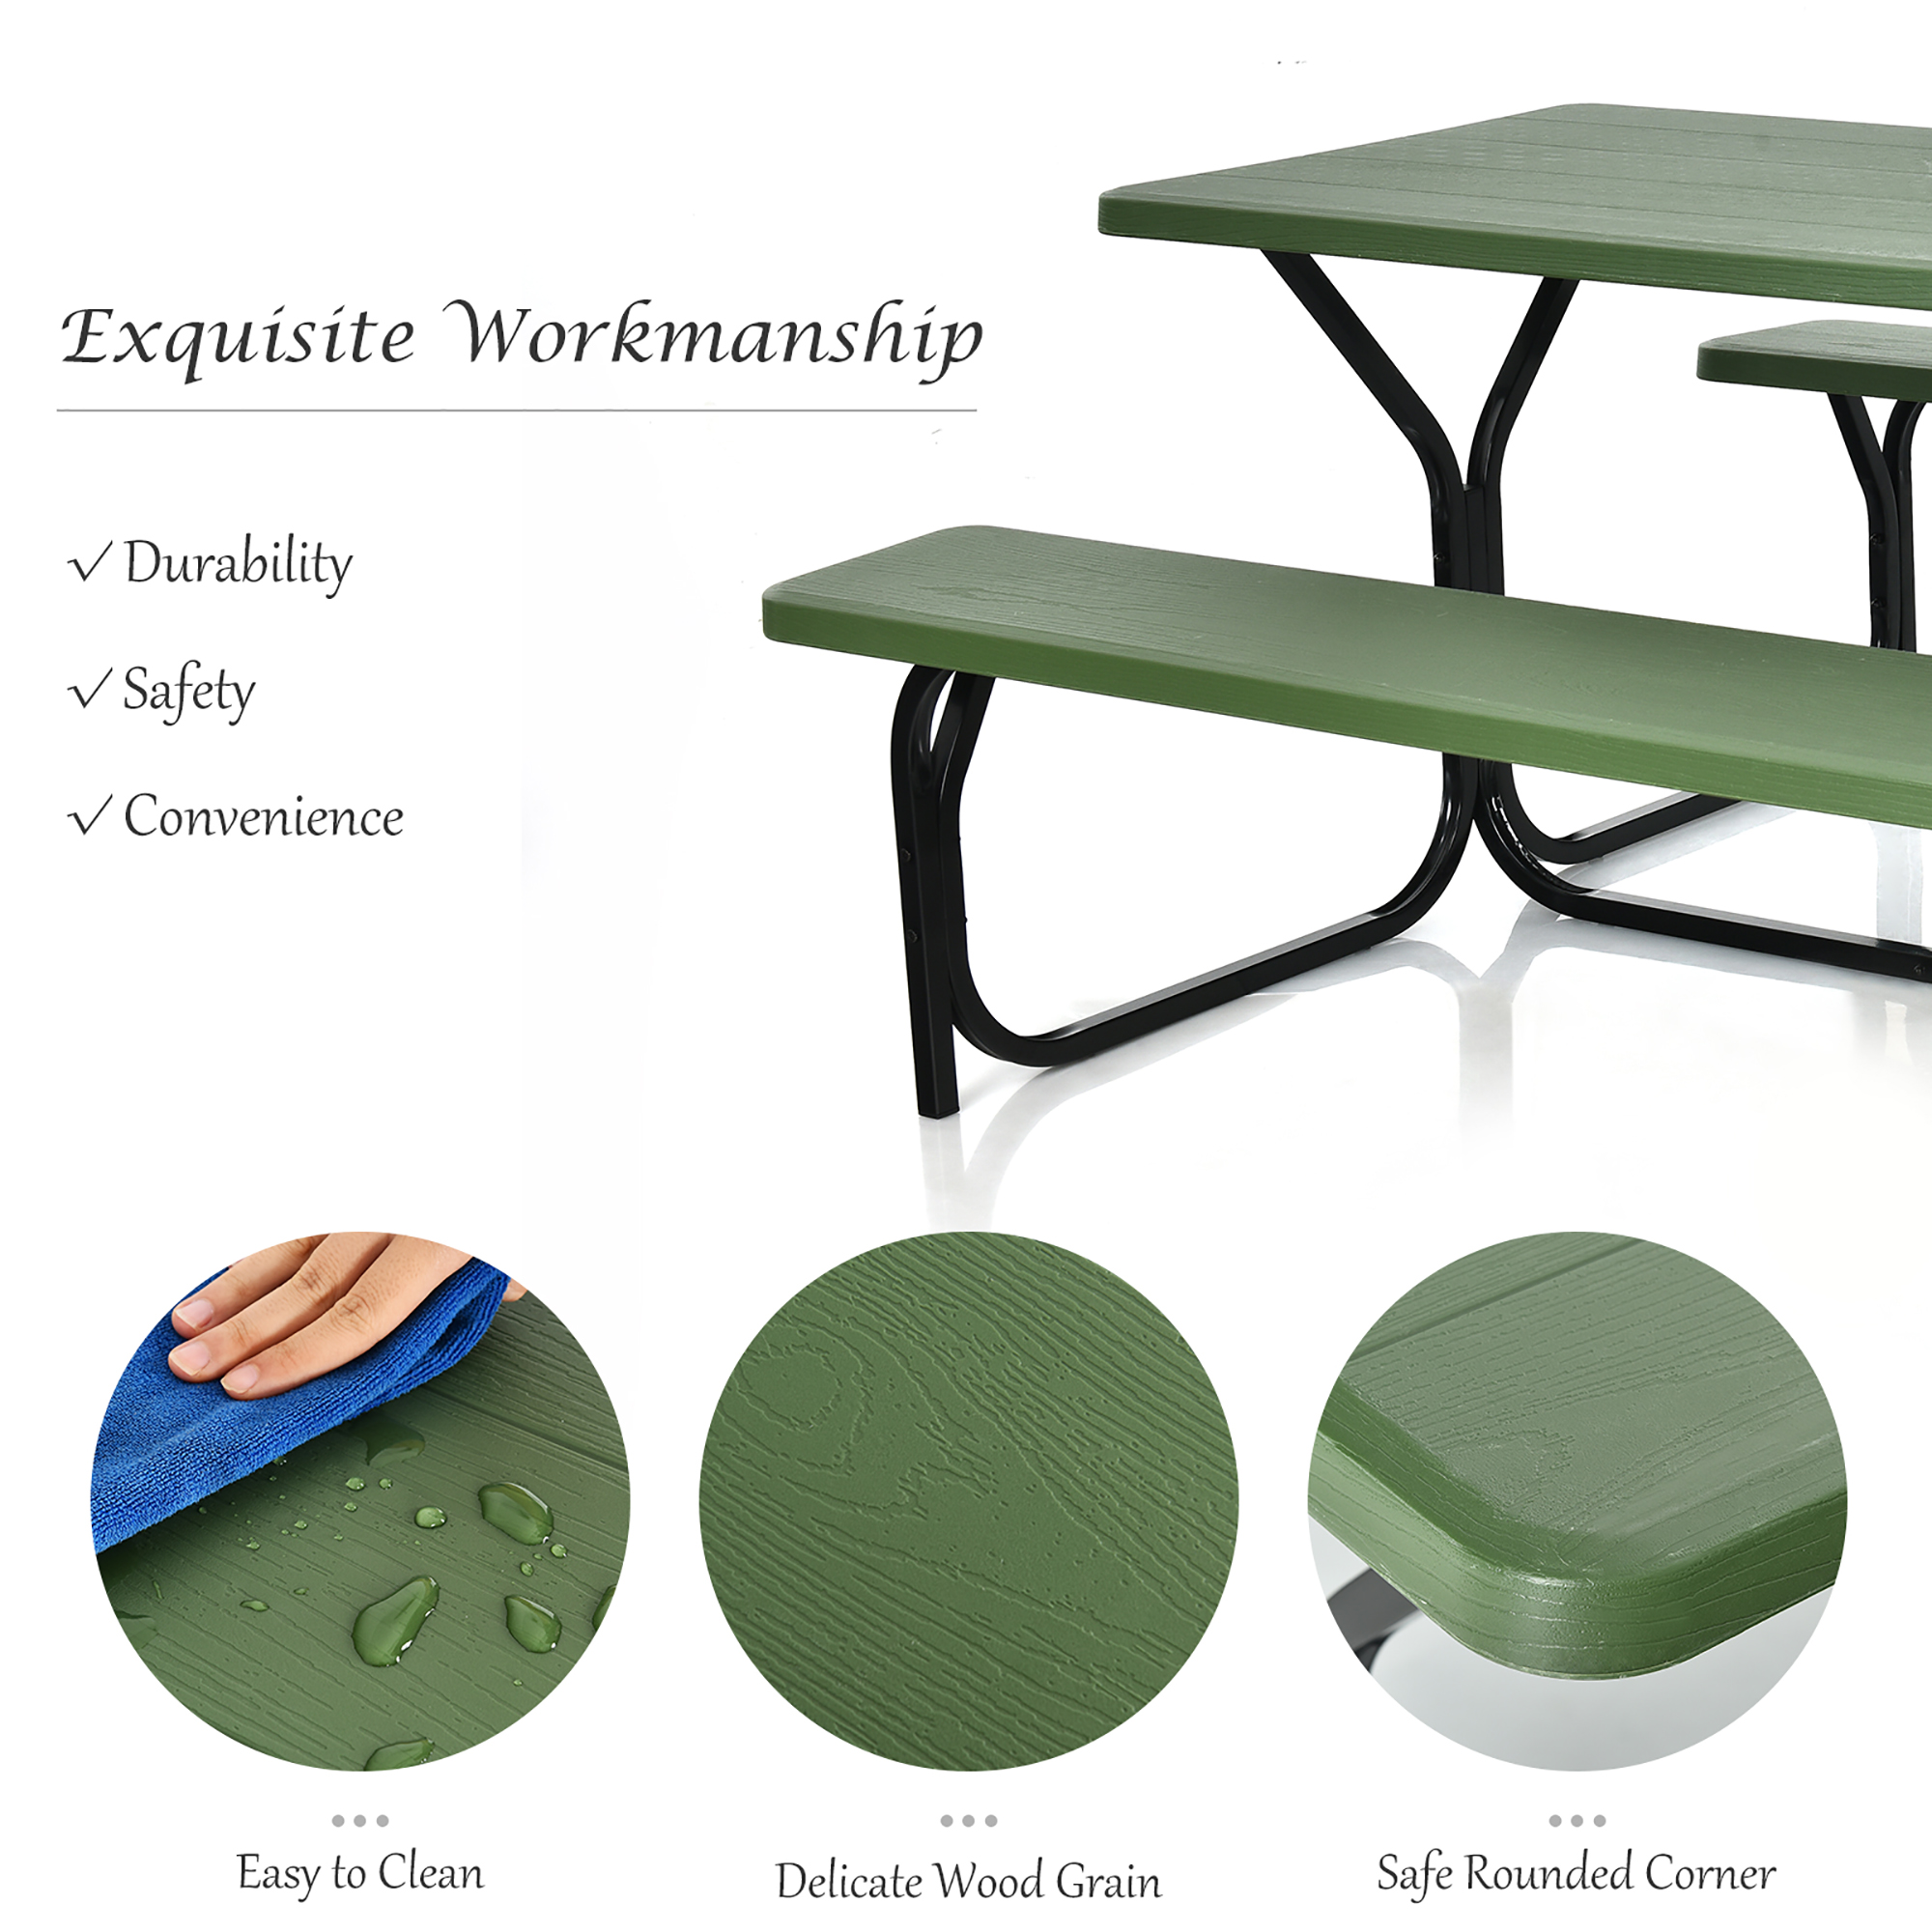 Costway Picnic Table Bench Set Outdoor Backyard Patio Garden Party Dining All Weather Green - image 4 of 10